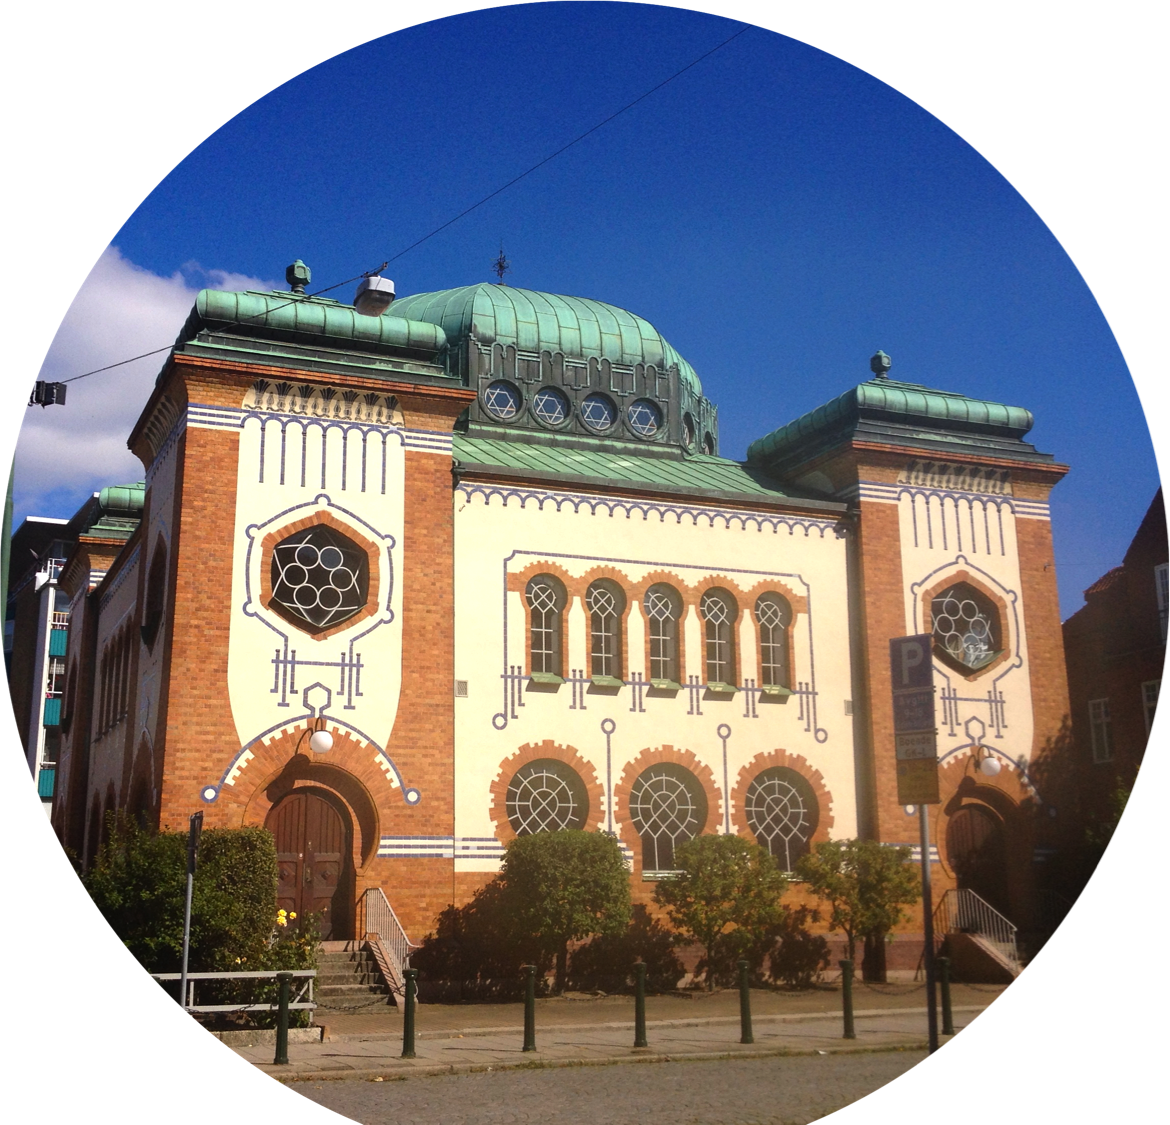 The synagogue in Malmo, Sweden. | Photo by Doreen El-Roiey